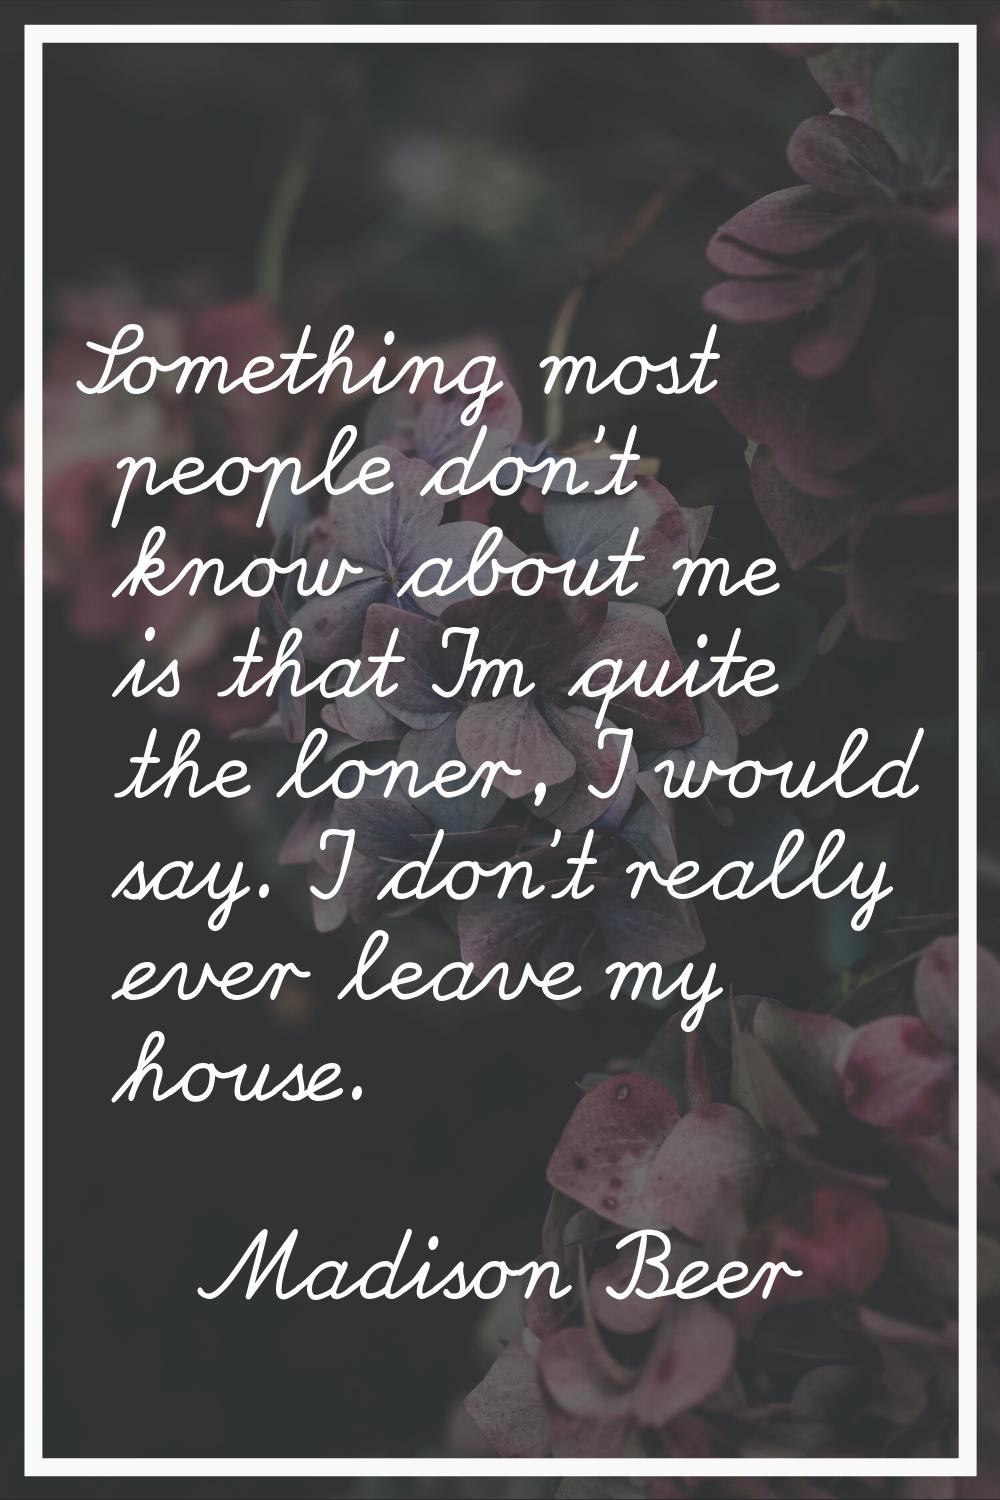 Something most people don't know about me is that I'm quite the loner, I would say. I don't really 